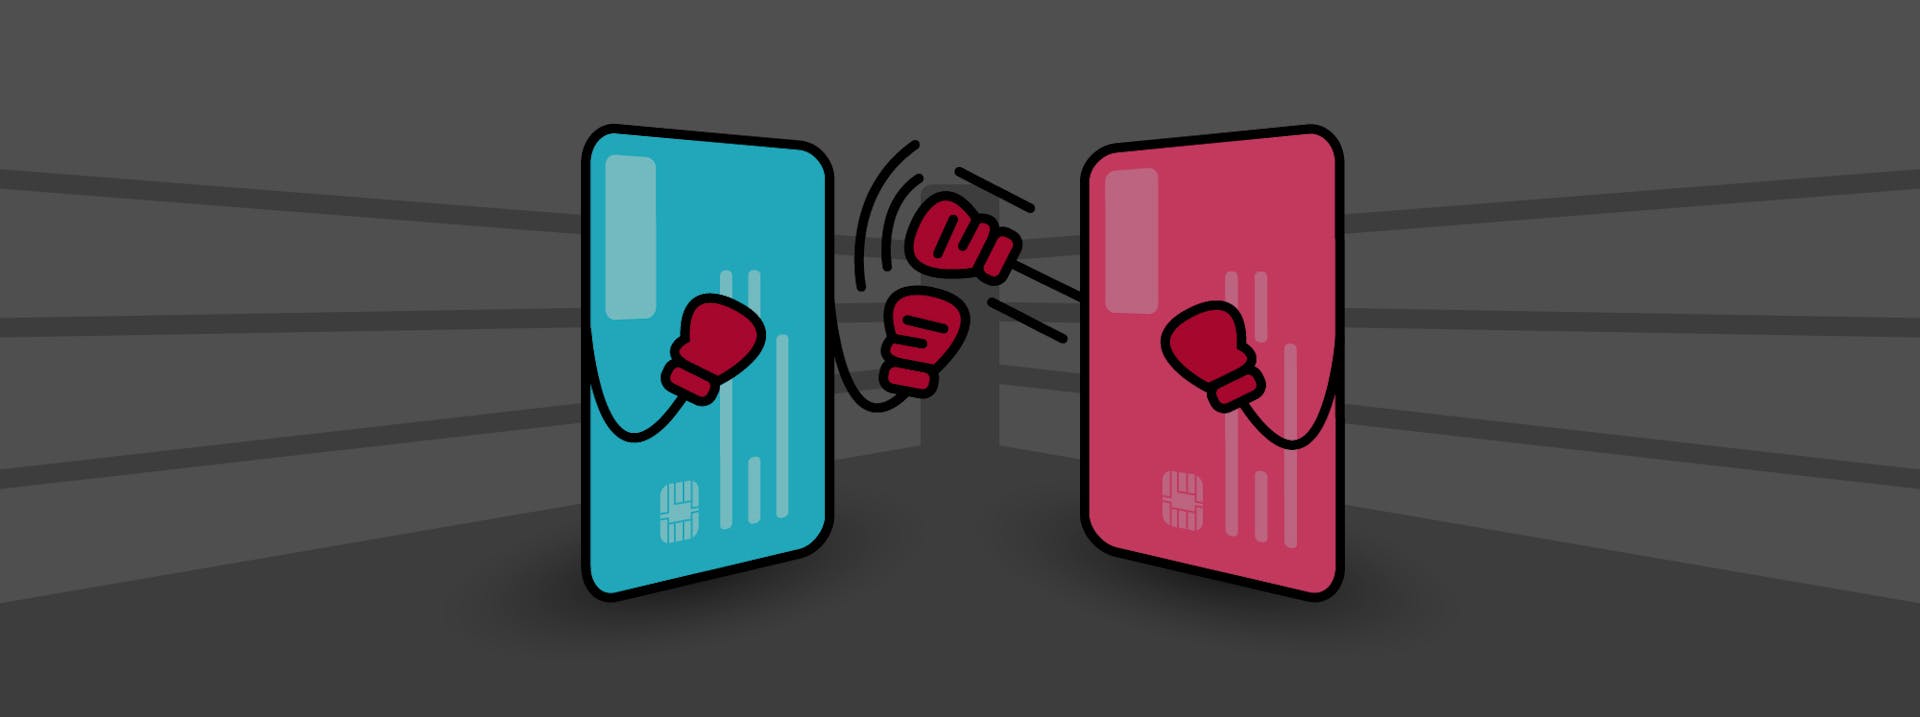 Illustration of two smartphones having a boxing match